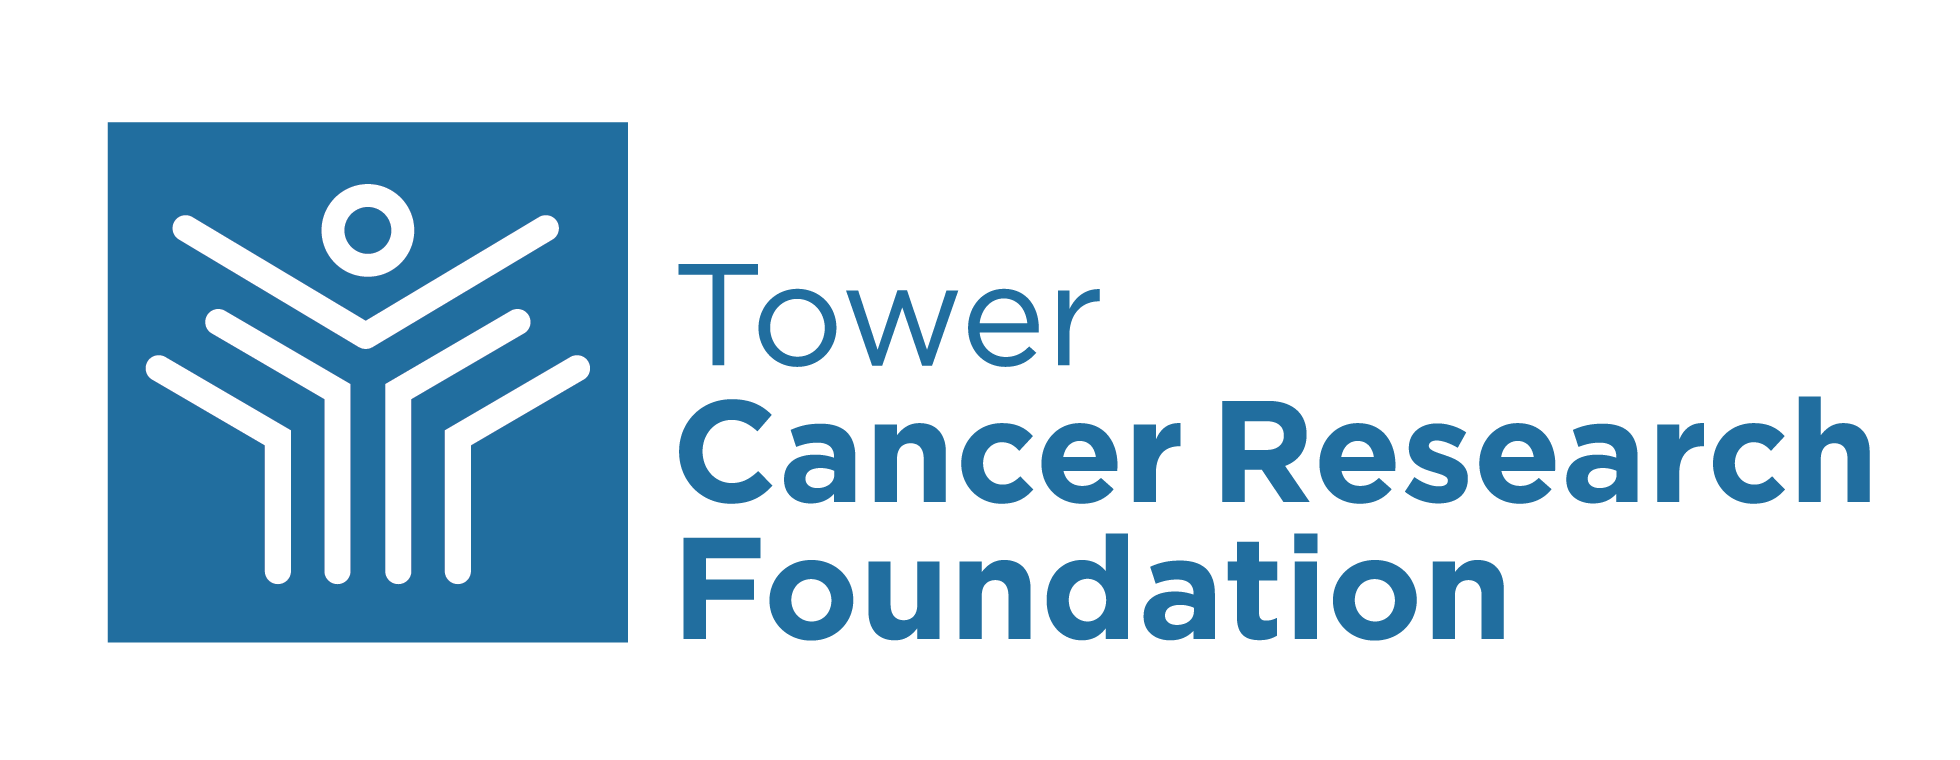 Tower Cancer Research Foundation logo